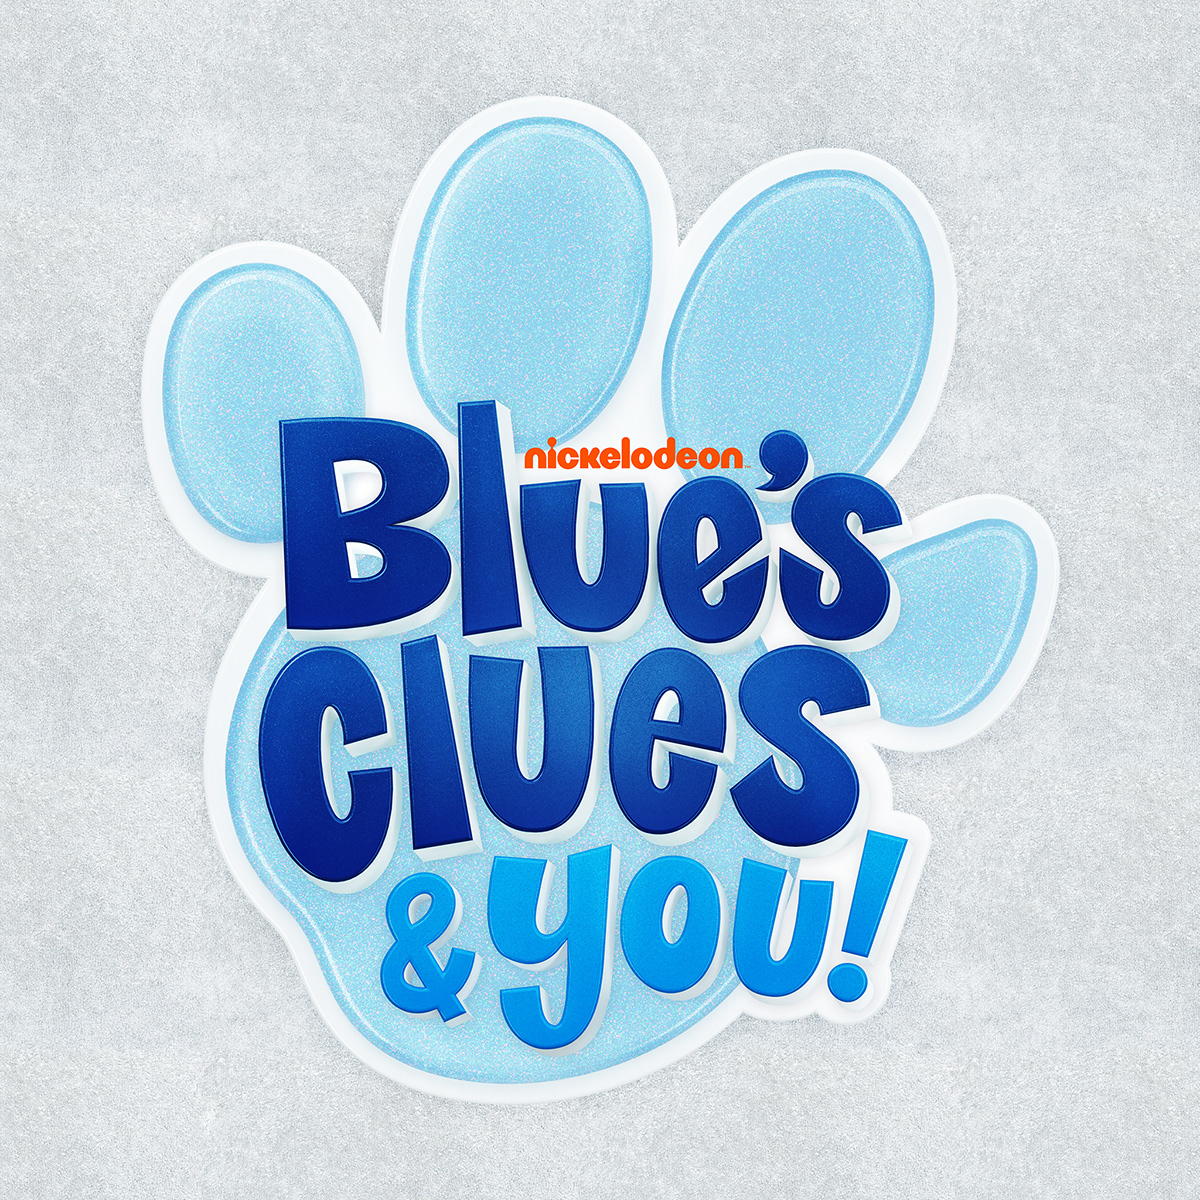 Nickelodeon's New Show Blues Clues & You!'s Logo on Behance